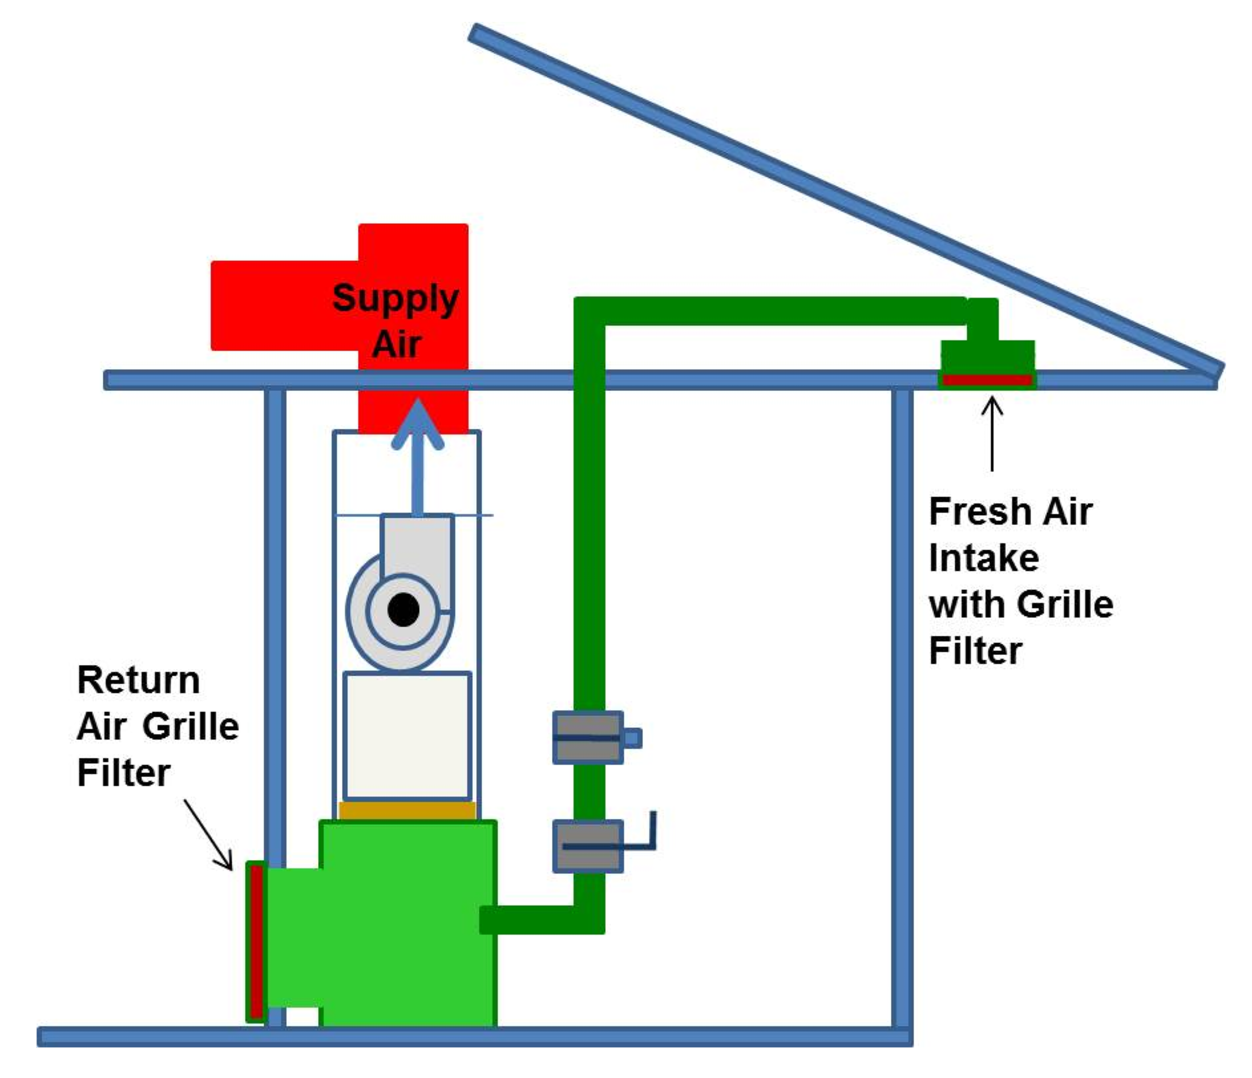 2. An industrial HVAC system shown in Fig. 2, filters